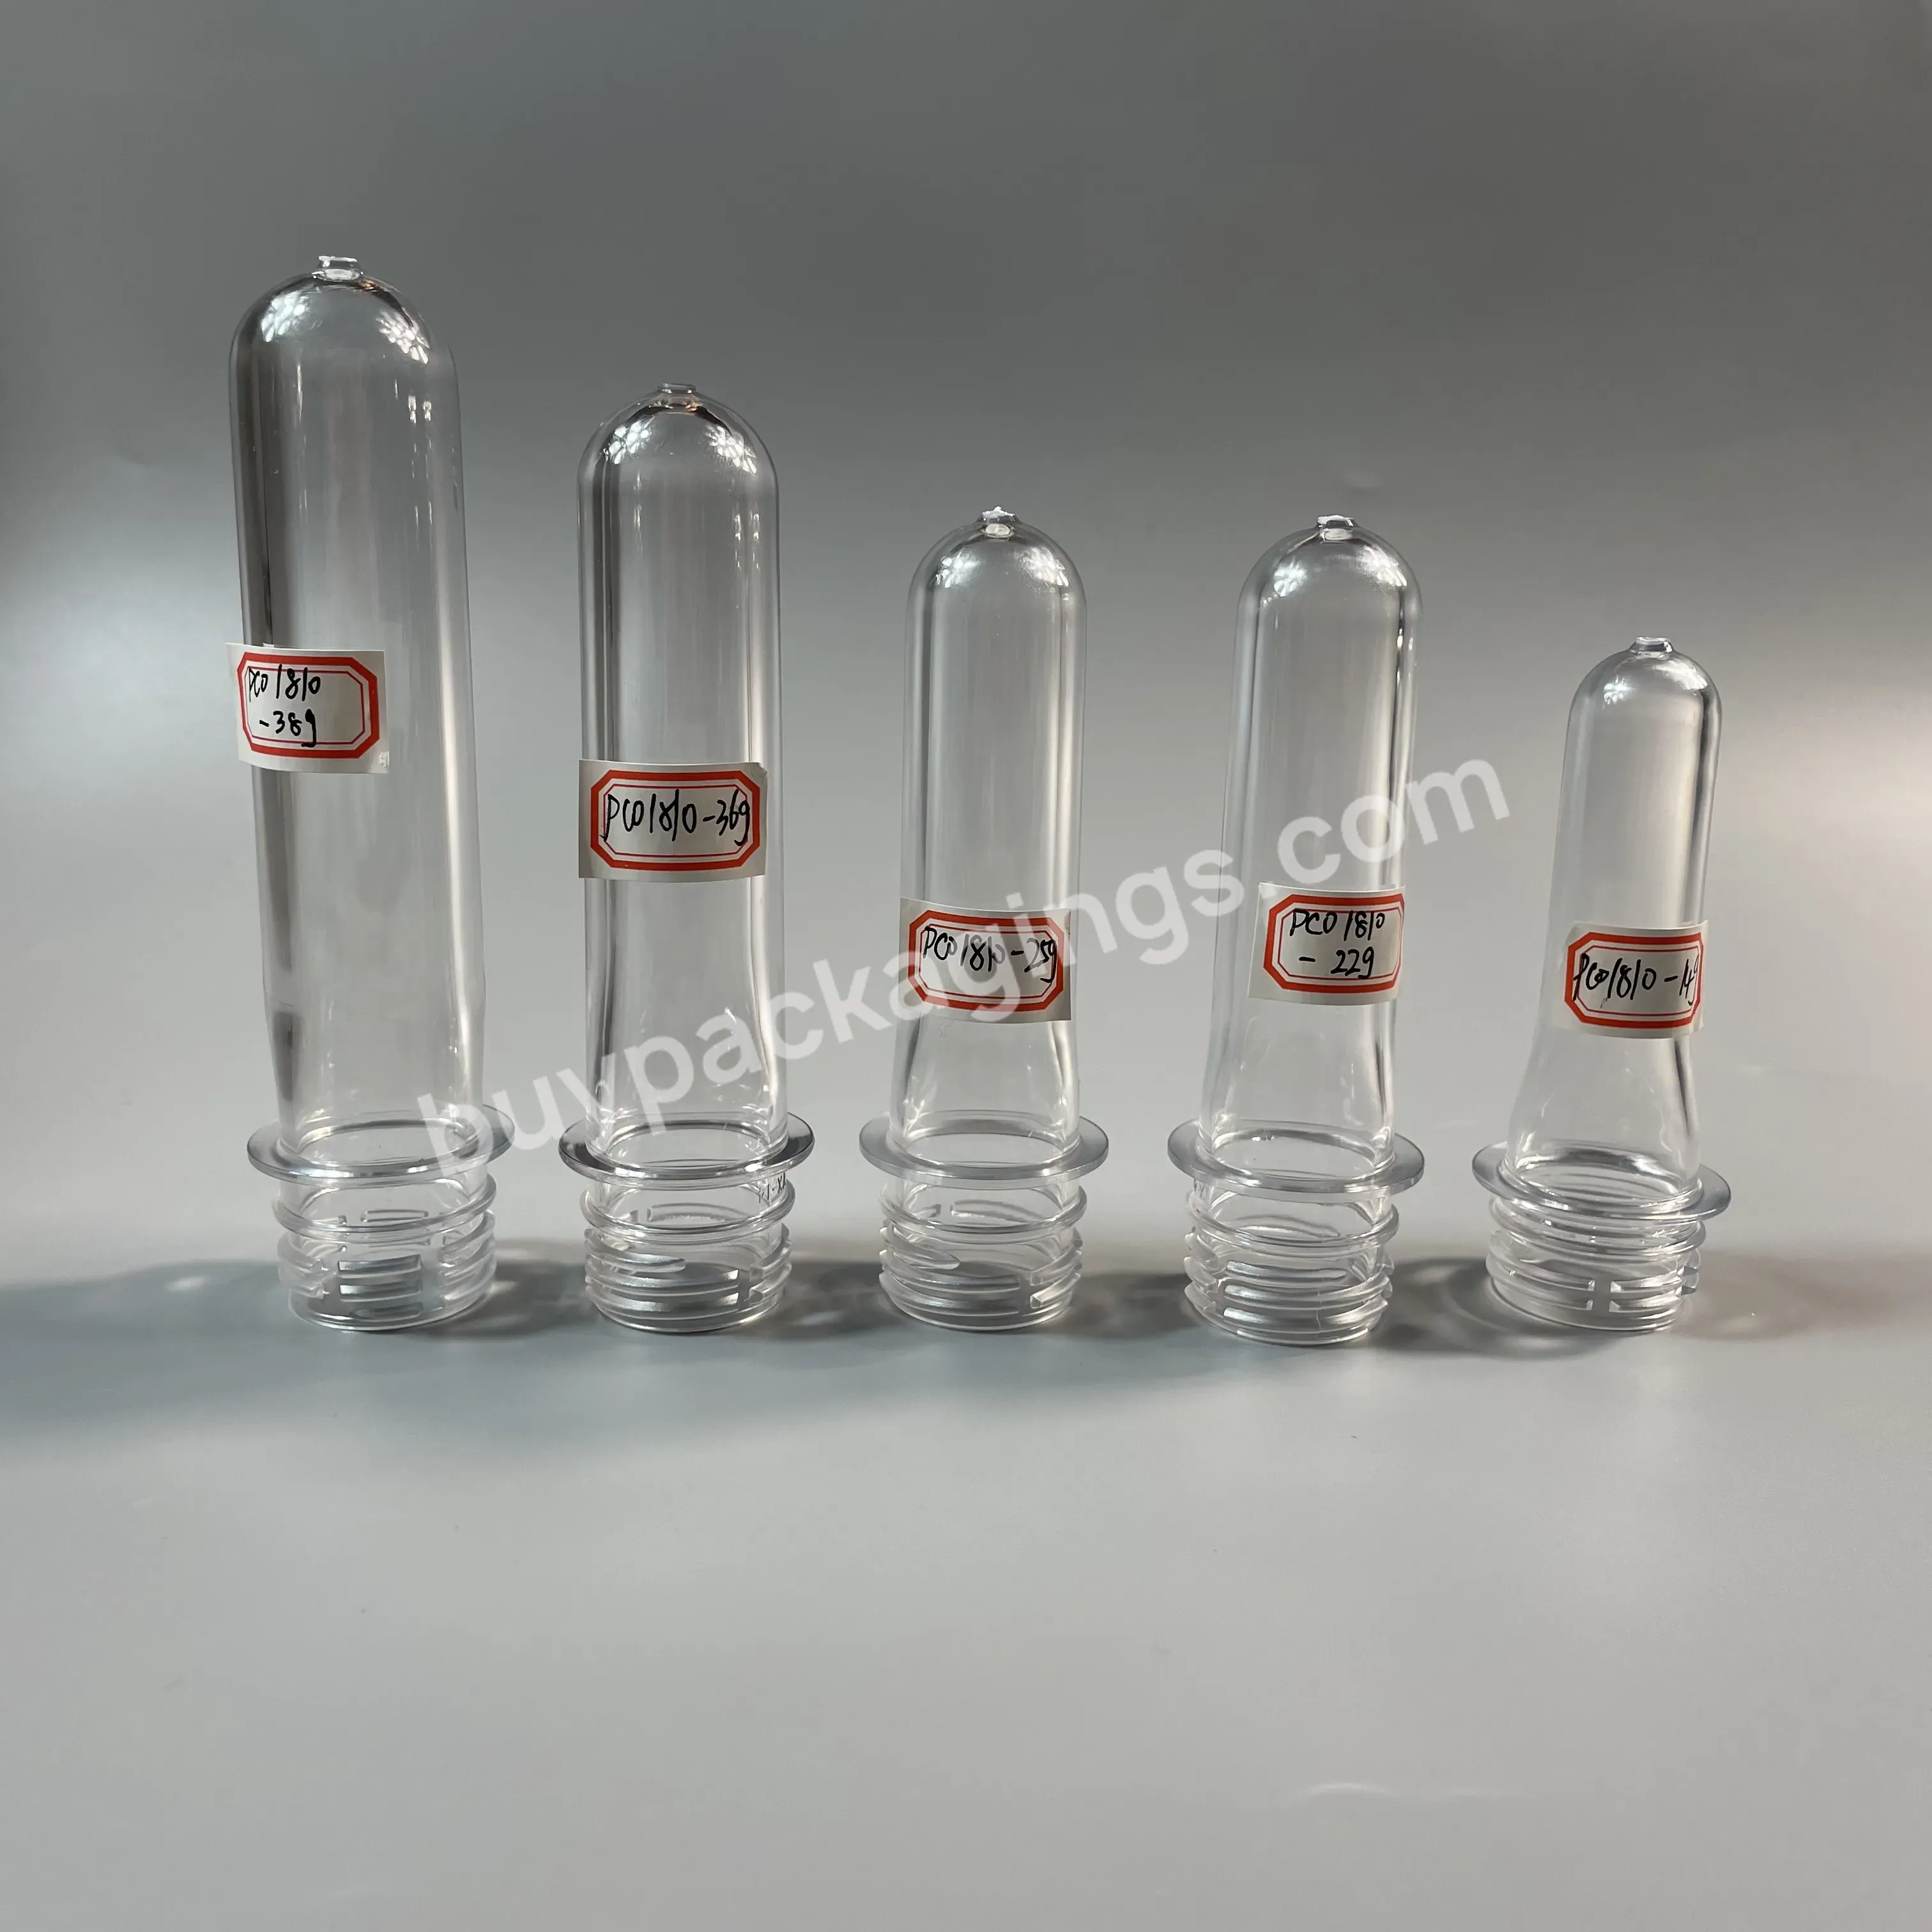 Preform Pco 1810 14g 22g 25g 36g 38g Preforms Water Bottle Raw Material Pet Preform 500ml For Water - Buy Water Bottle Pet Preform,28mm Pco 1881 Virgin Pet Preform High Quality Quick Shipping,28mm Pco Neck Pet Preform /plastic Water Bottle Preform/ P